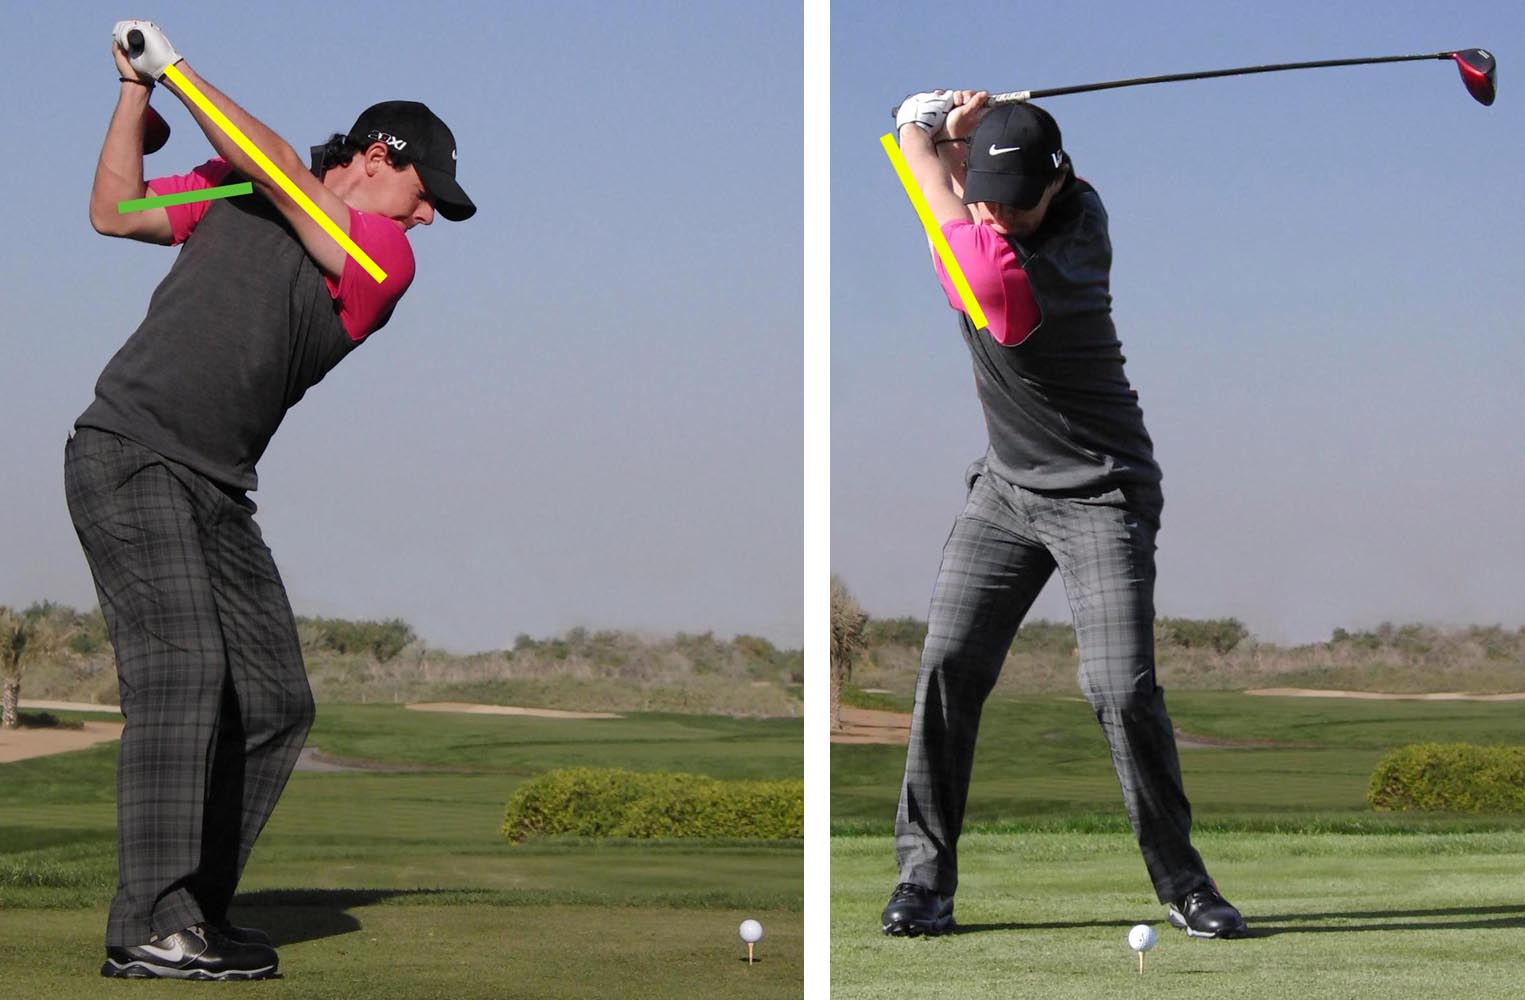 Here Rory shows us the importance of hip movement during the backswing